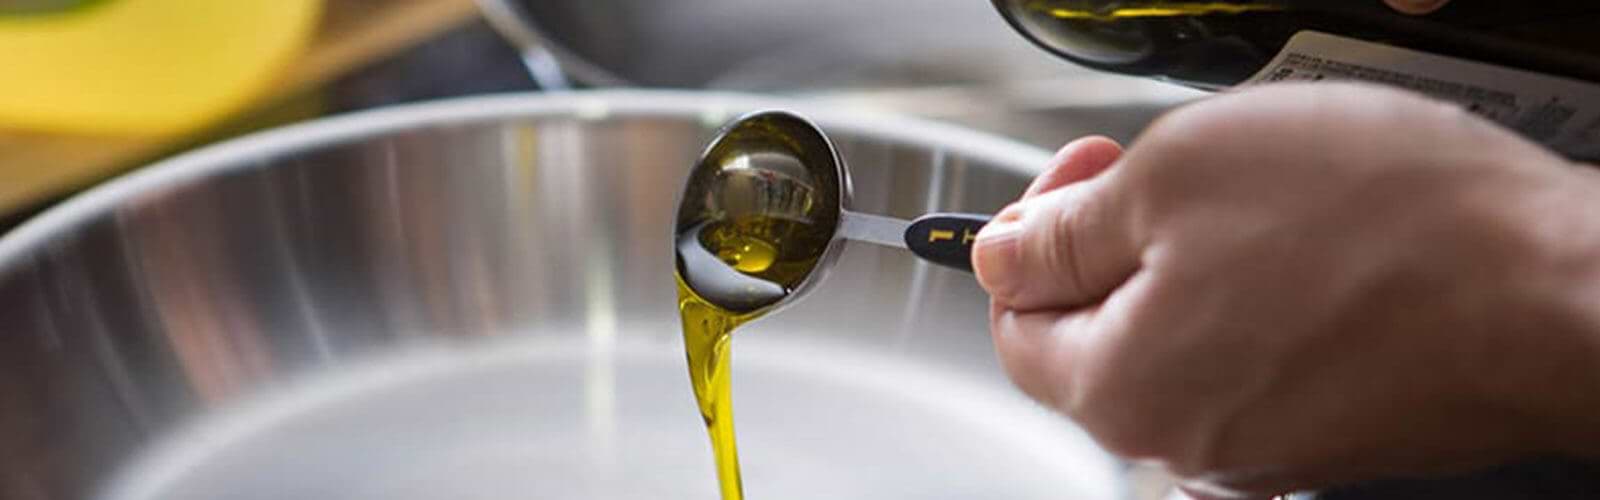 cooking oil cleanup